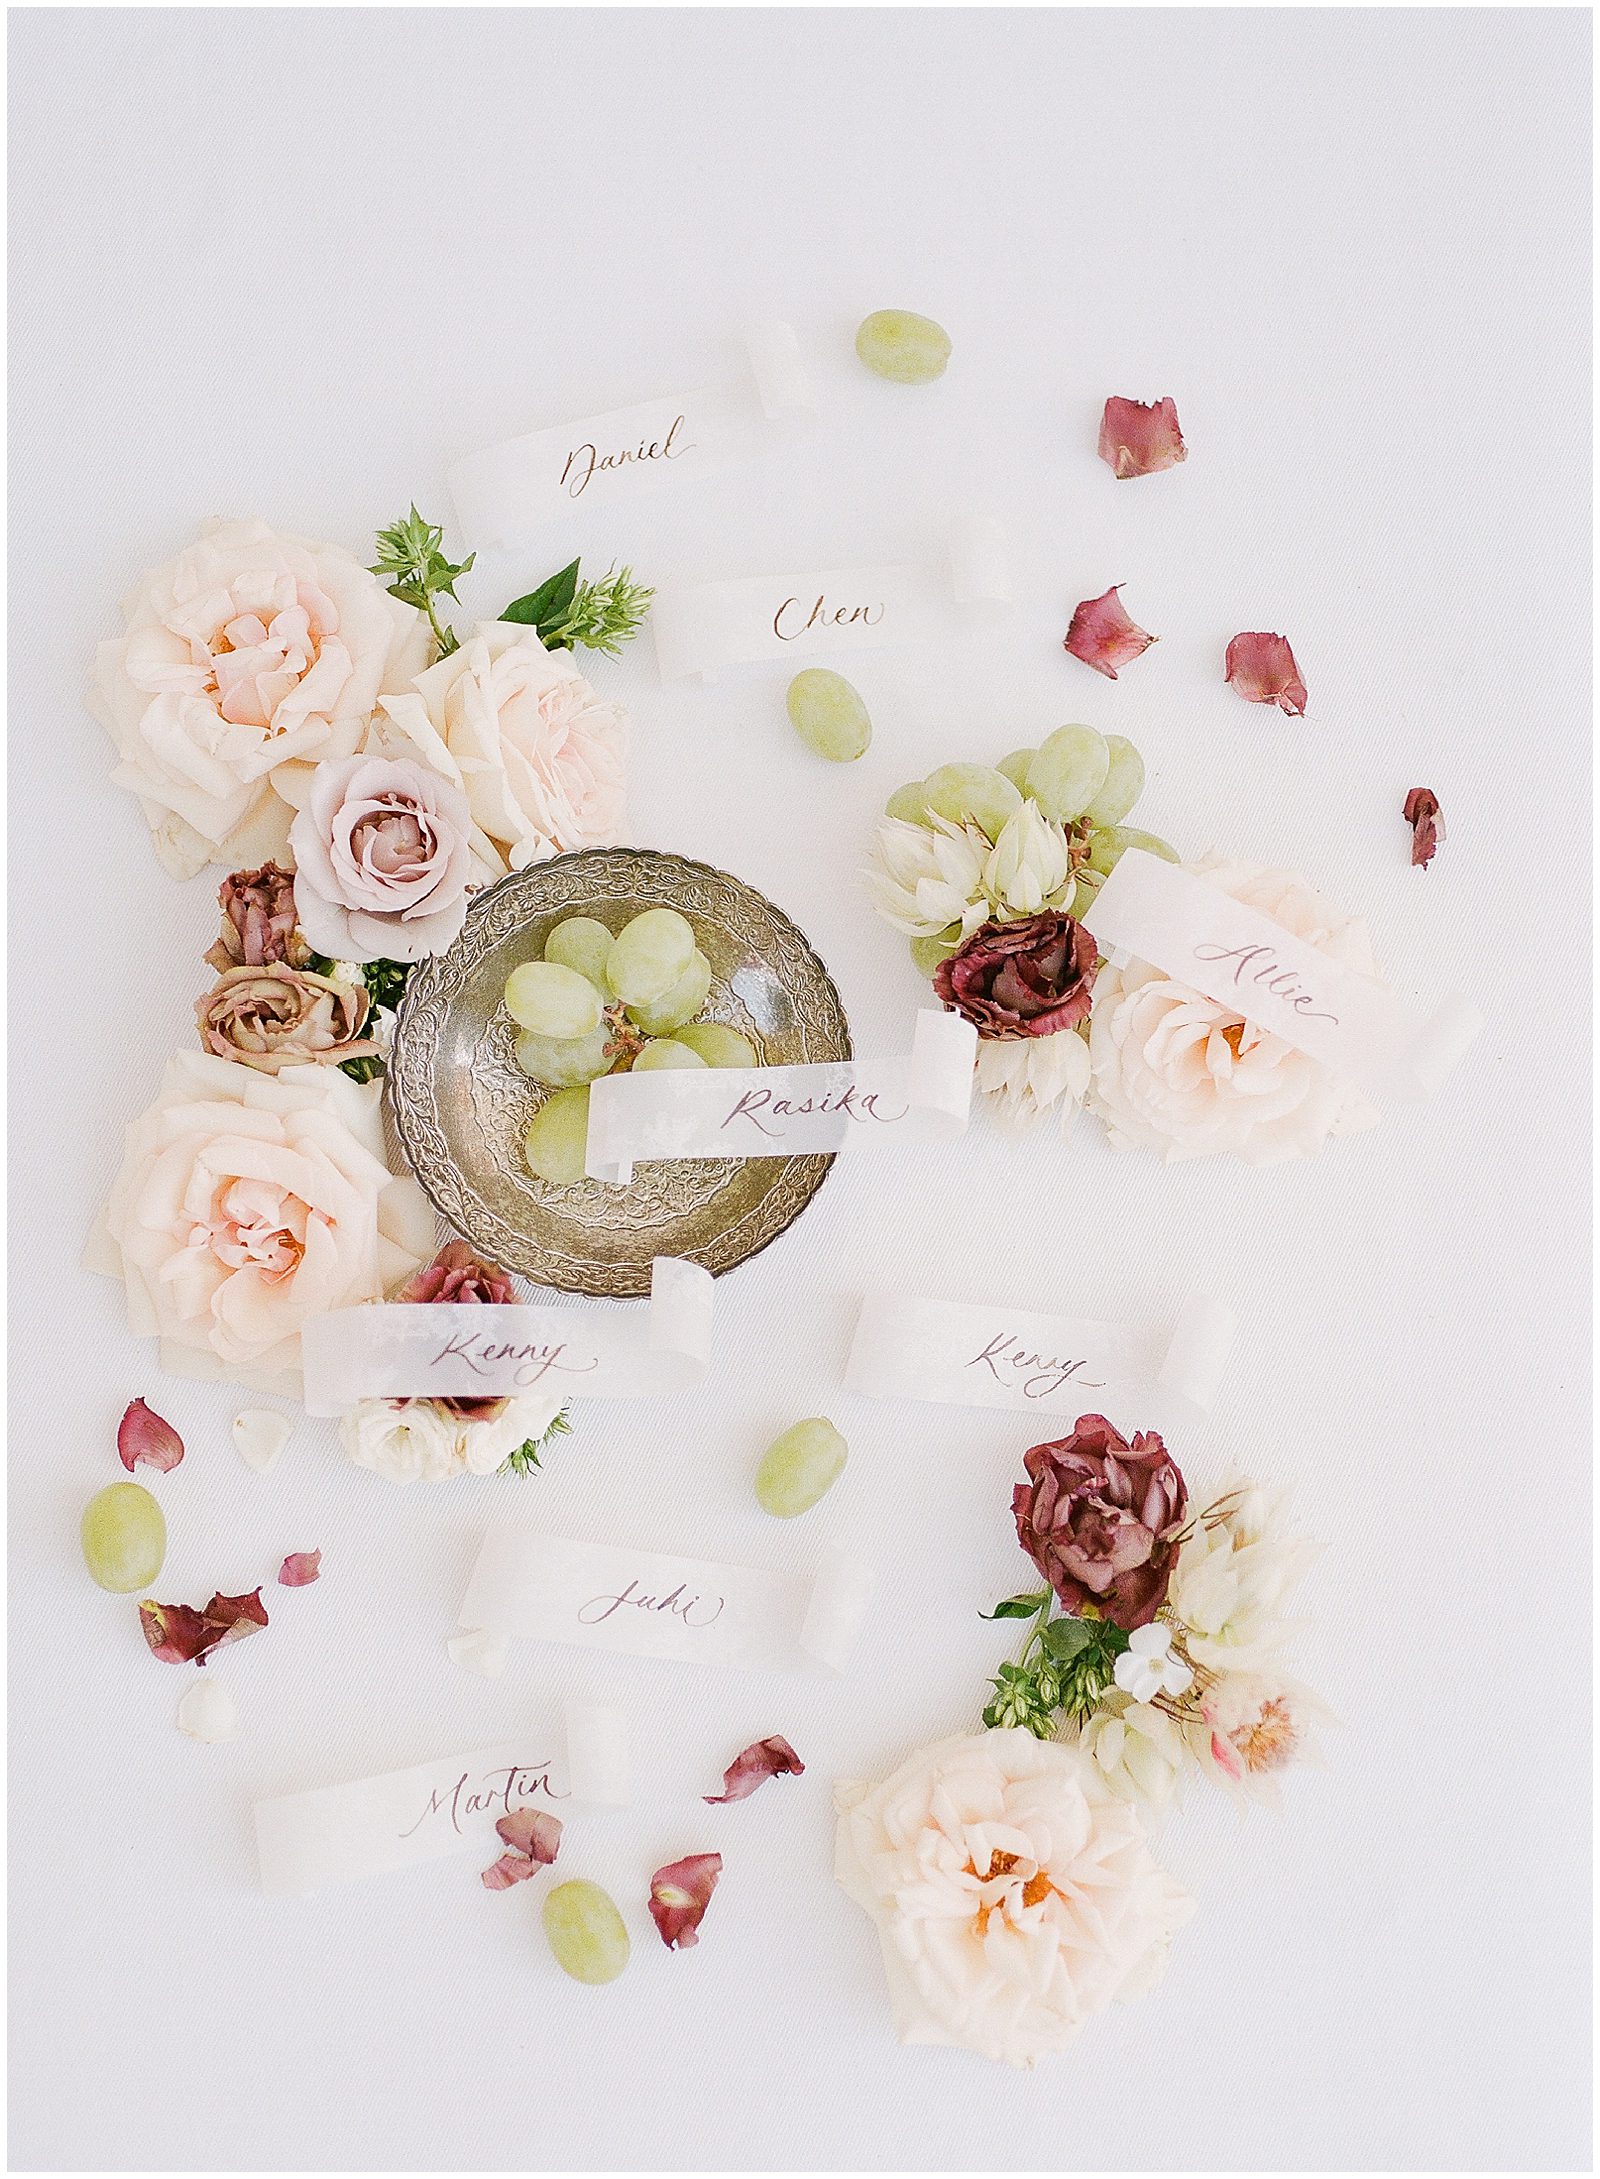 Name Cards and Flowers Photo